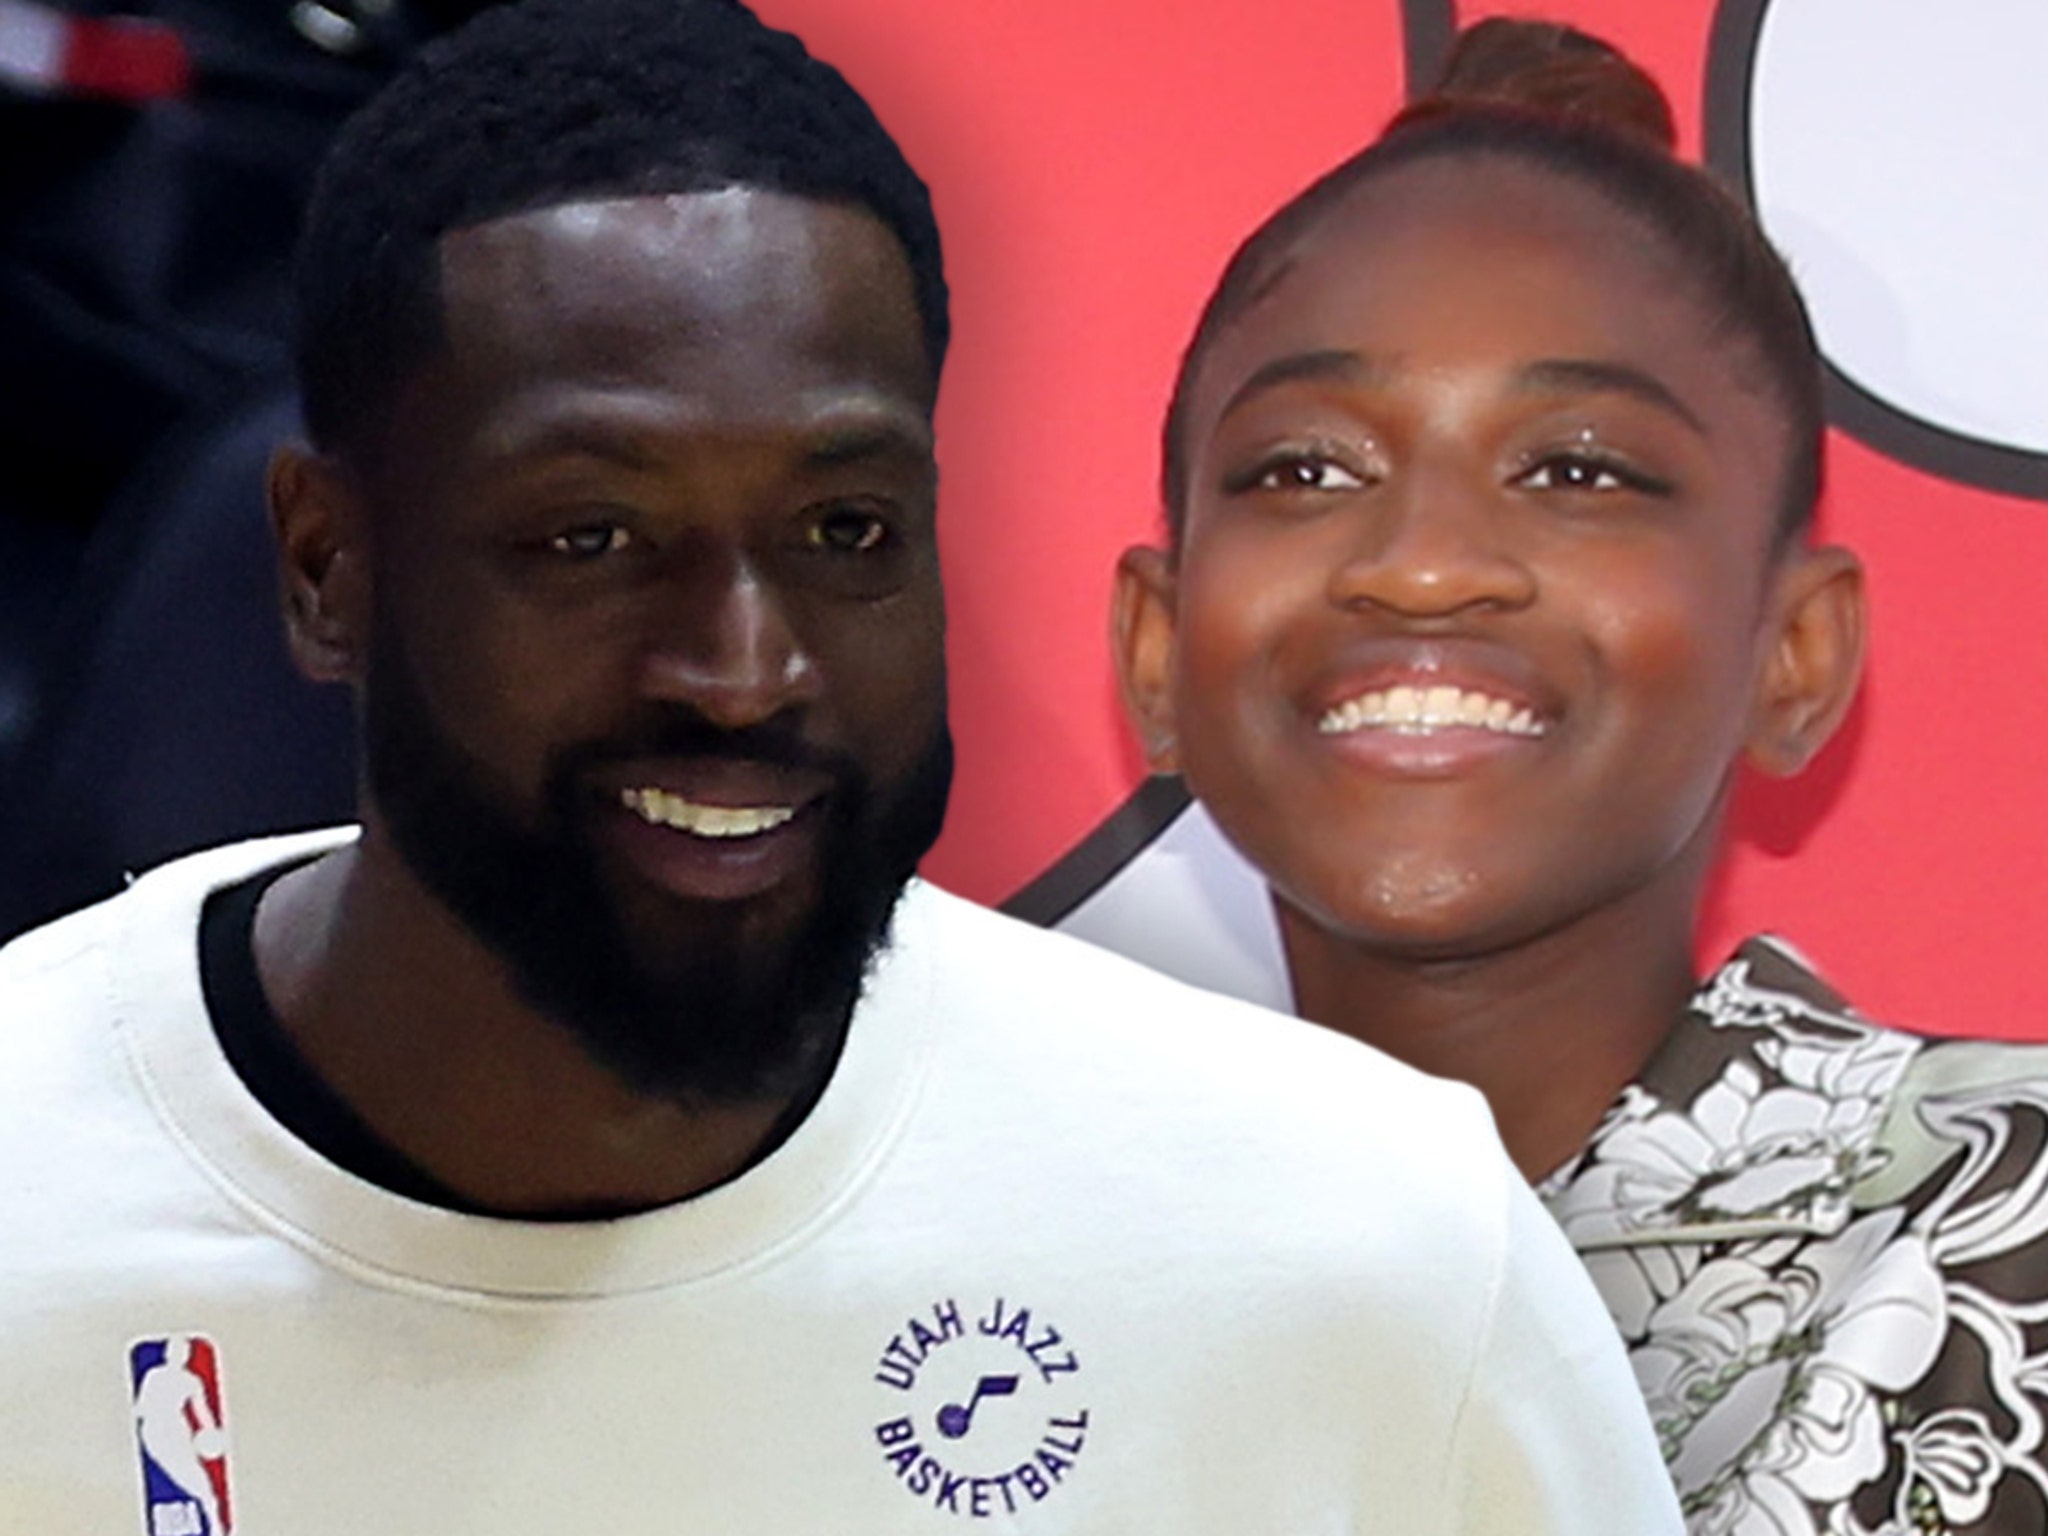 Dwyane Wade Said His Child Goes by the Name Zaya and Uses She and Her  Pronouns